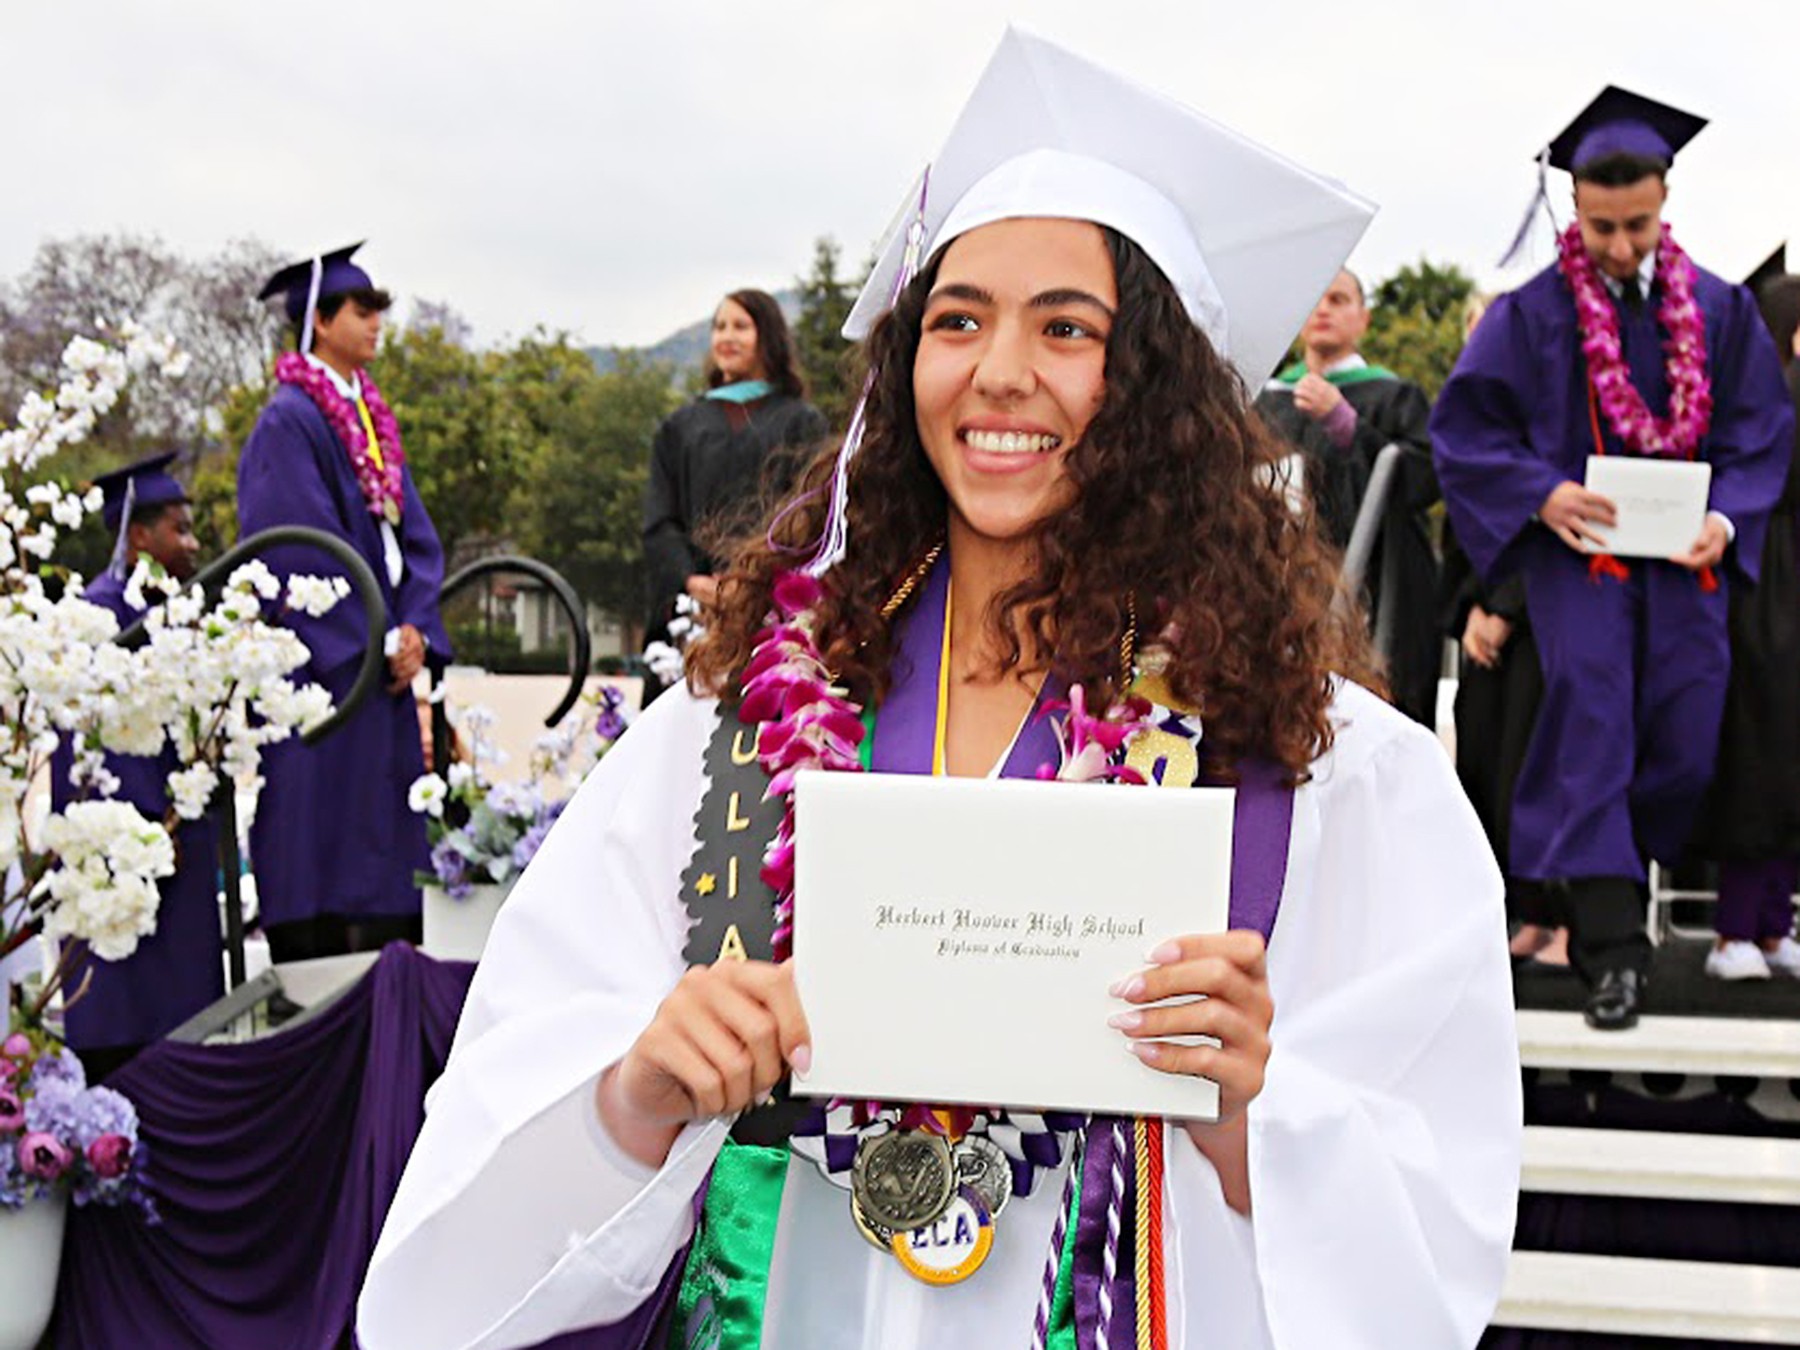 Hoover High School scholars strive to attend the best higher education institutions in the world. They engage in academic and real-world experiences to move toward their dreams. 